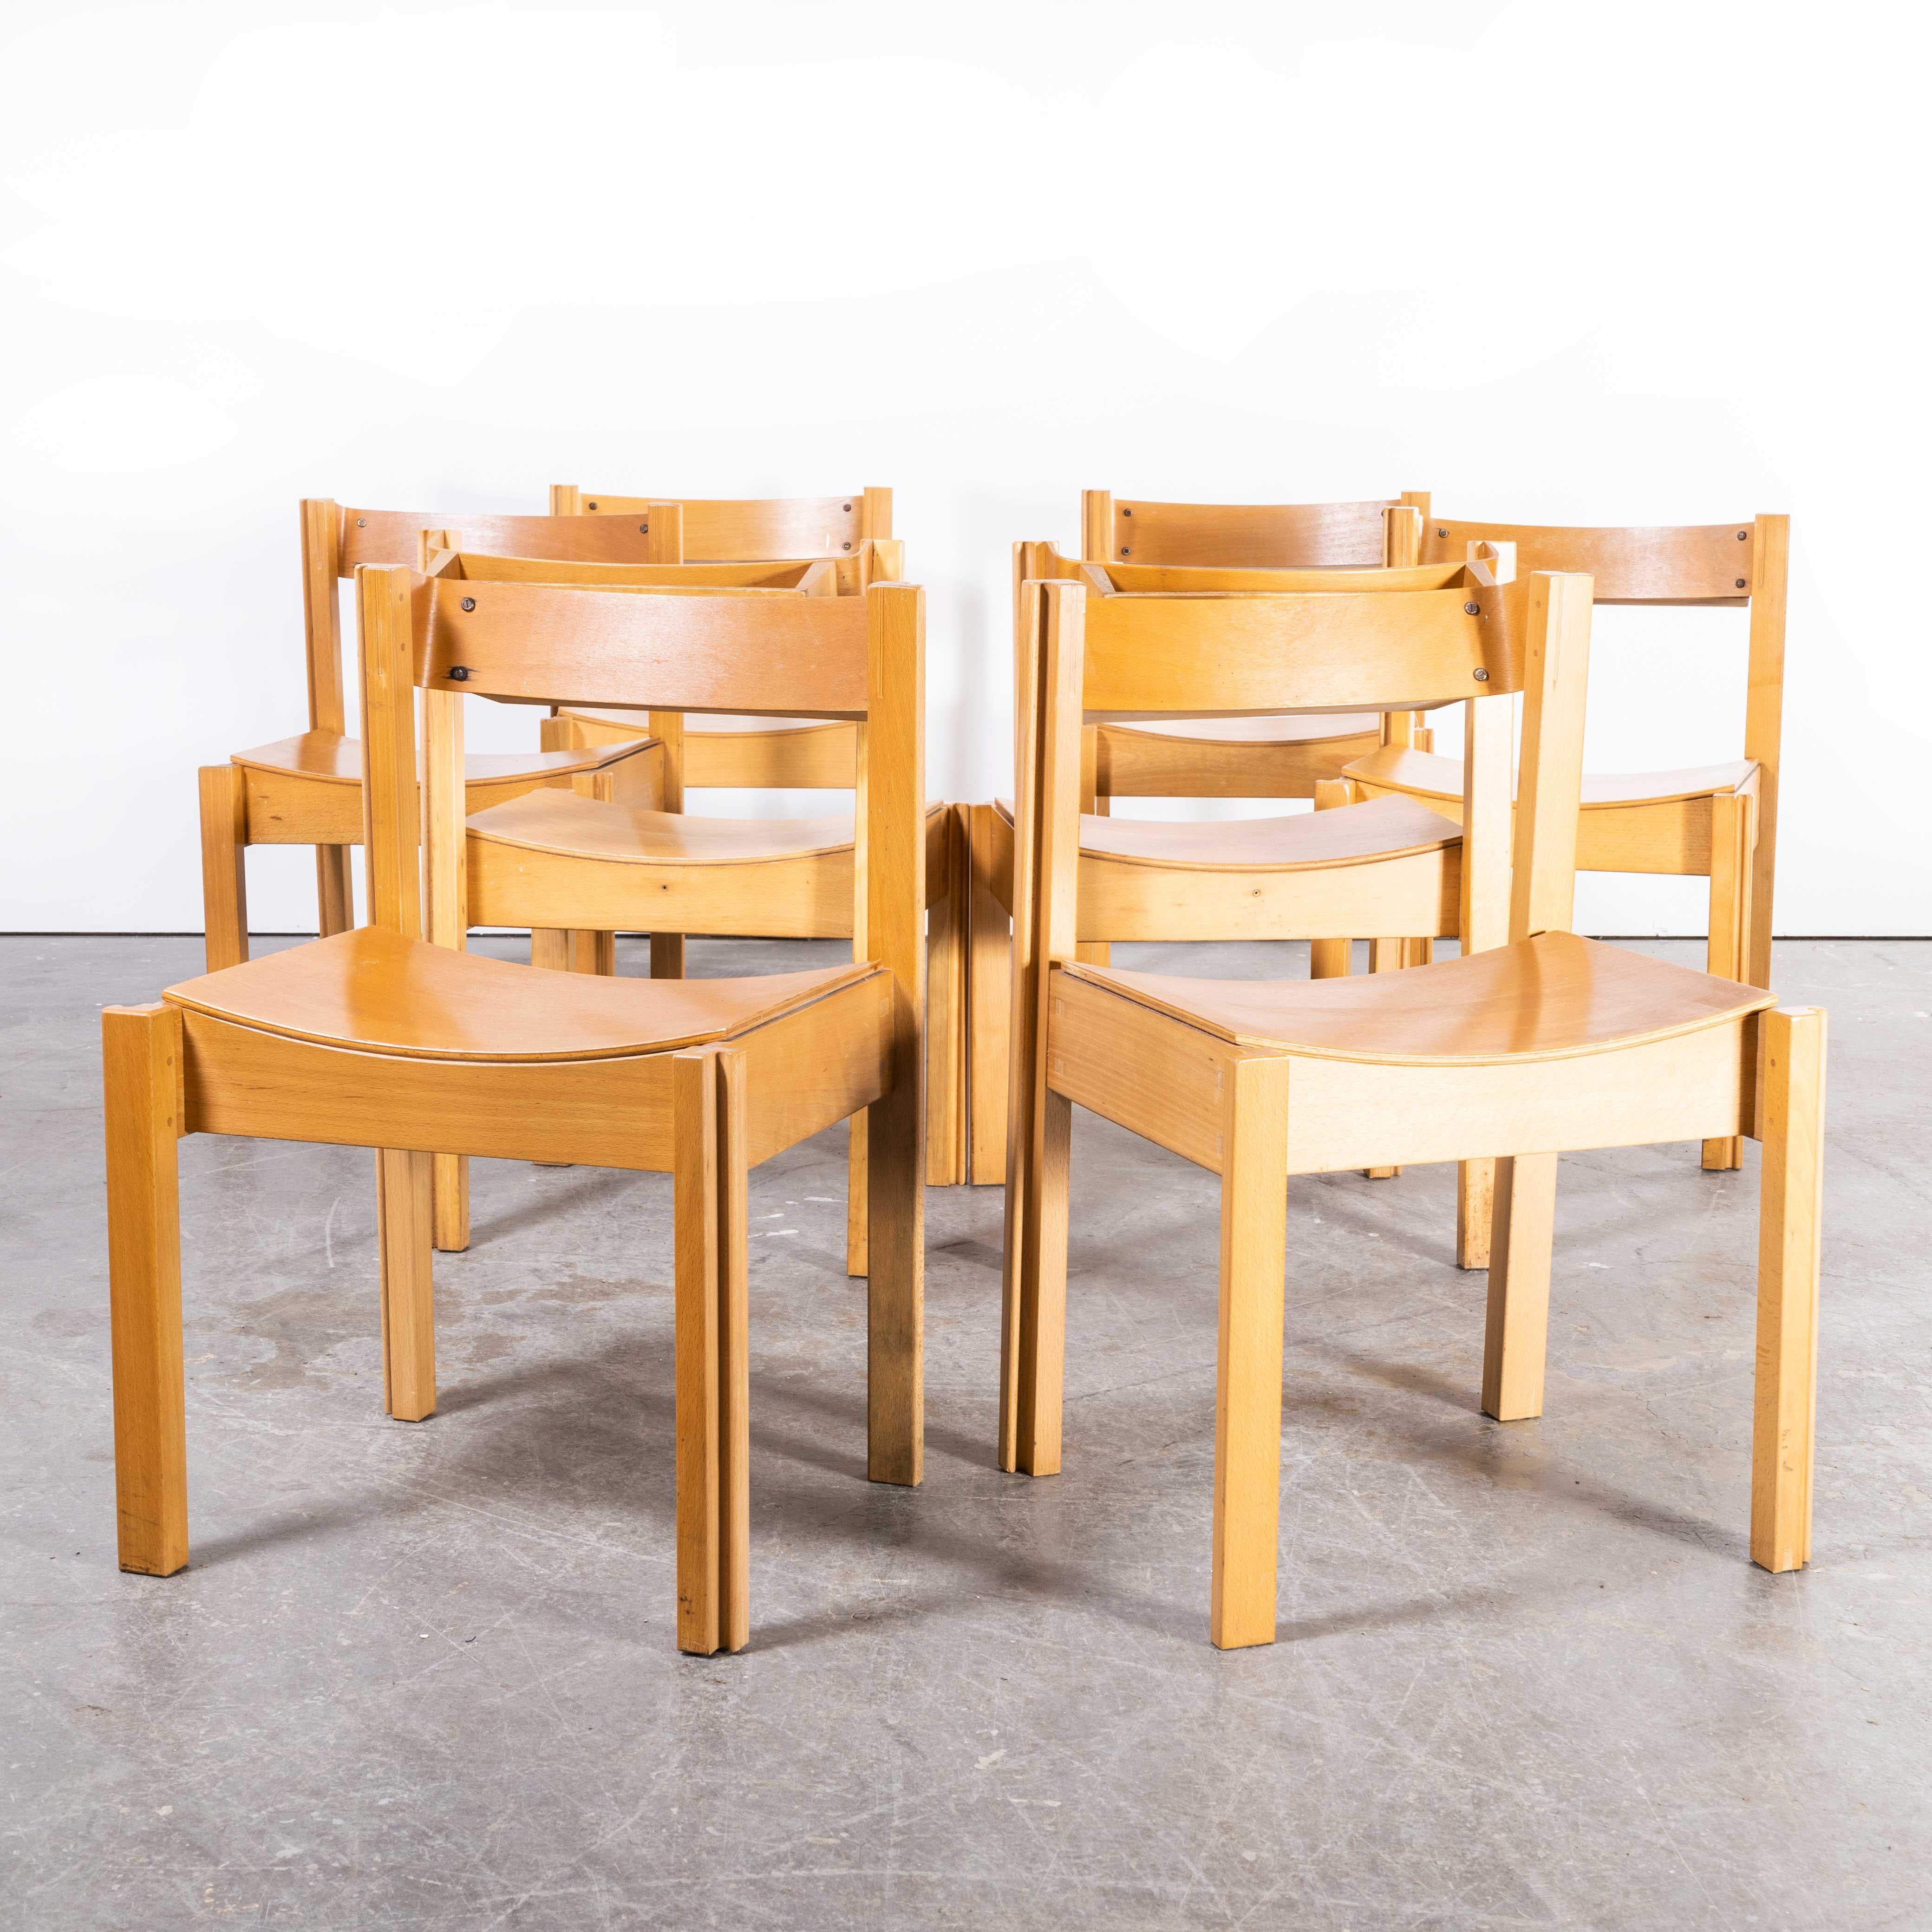 1960's Linking And Stacking Chairs By Clive Bacon - Set Of Eight For Sale 4